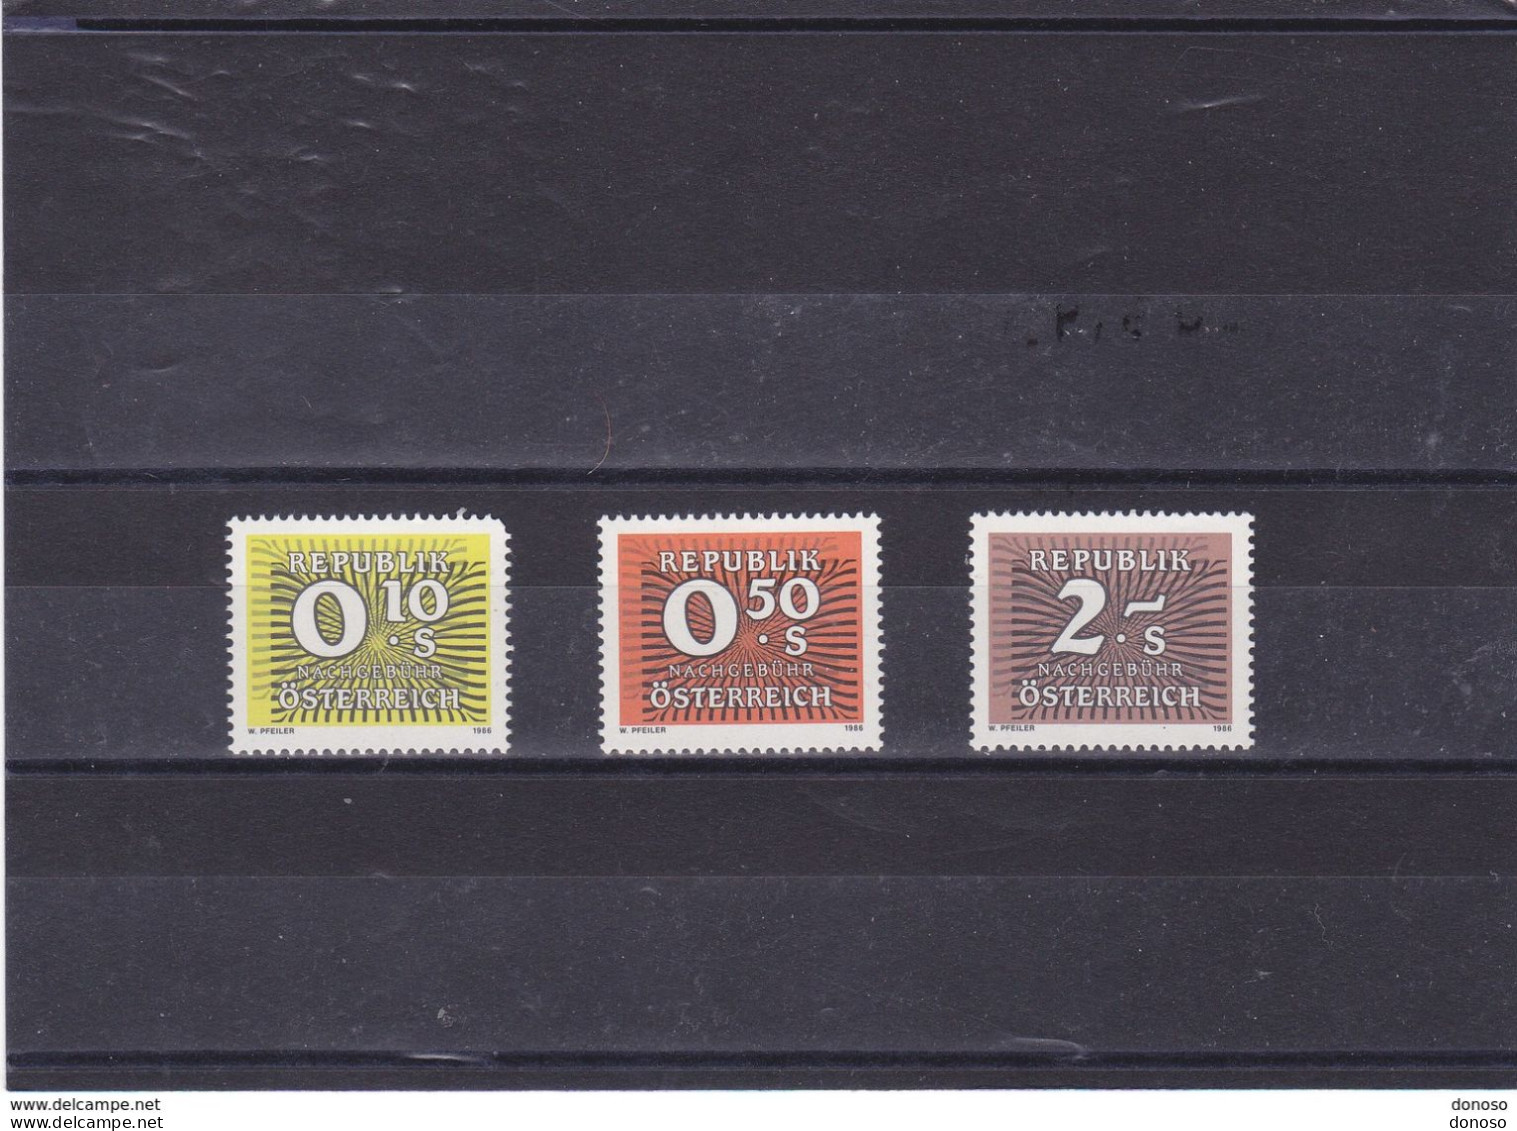 AUTRICHE 1986  TAXE Yvert 258-260 NEUF** MNH - Unused Stamps